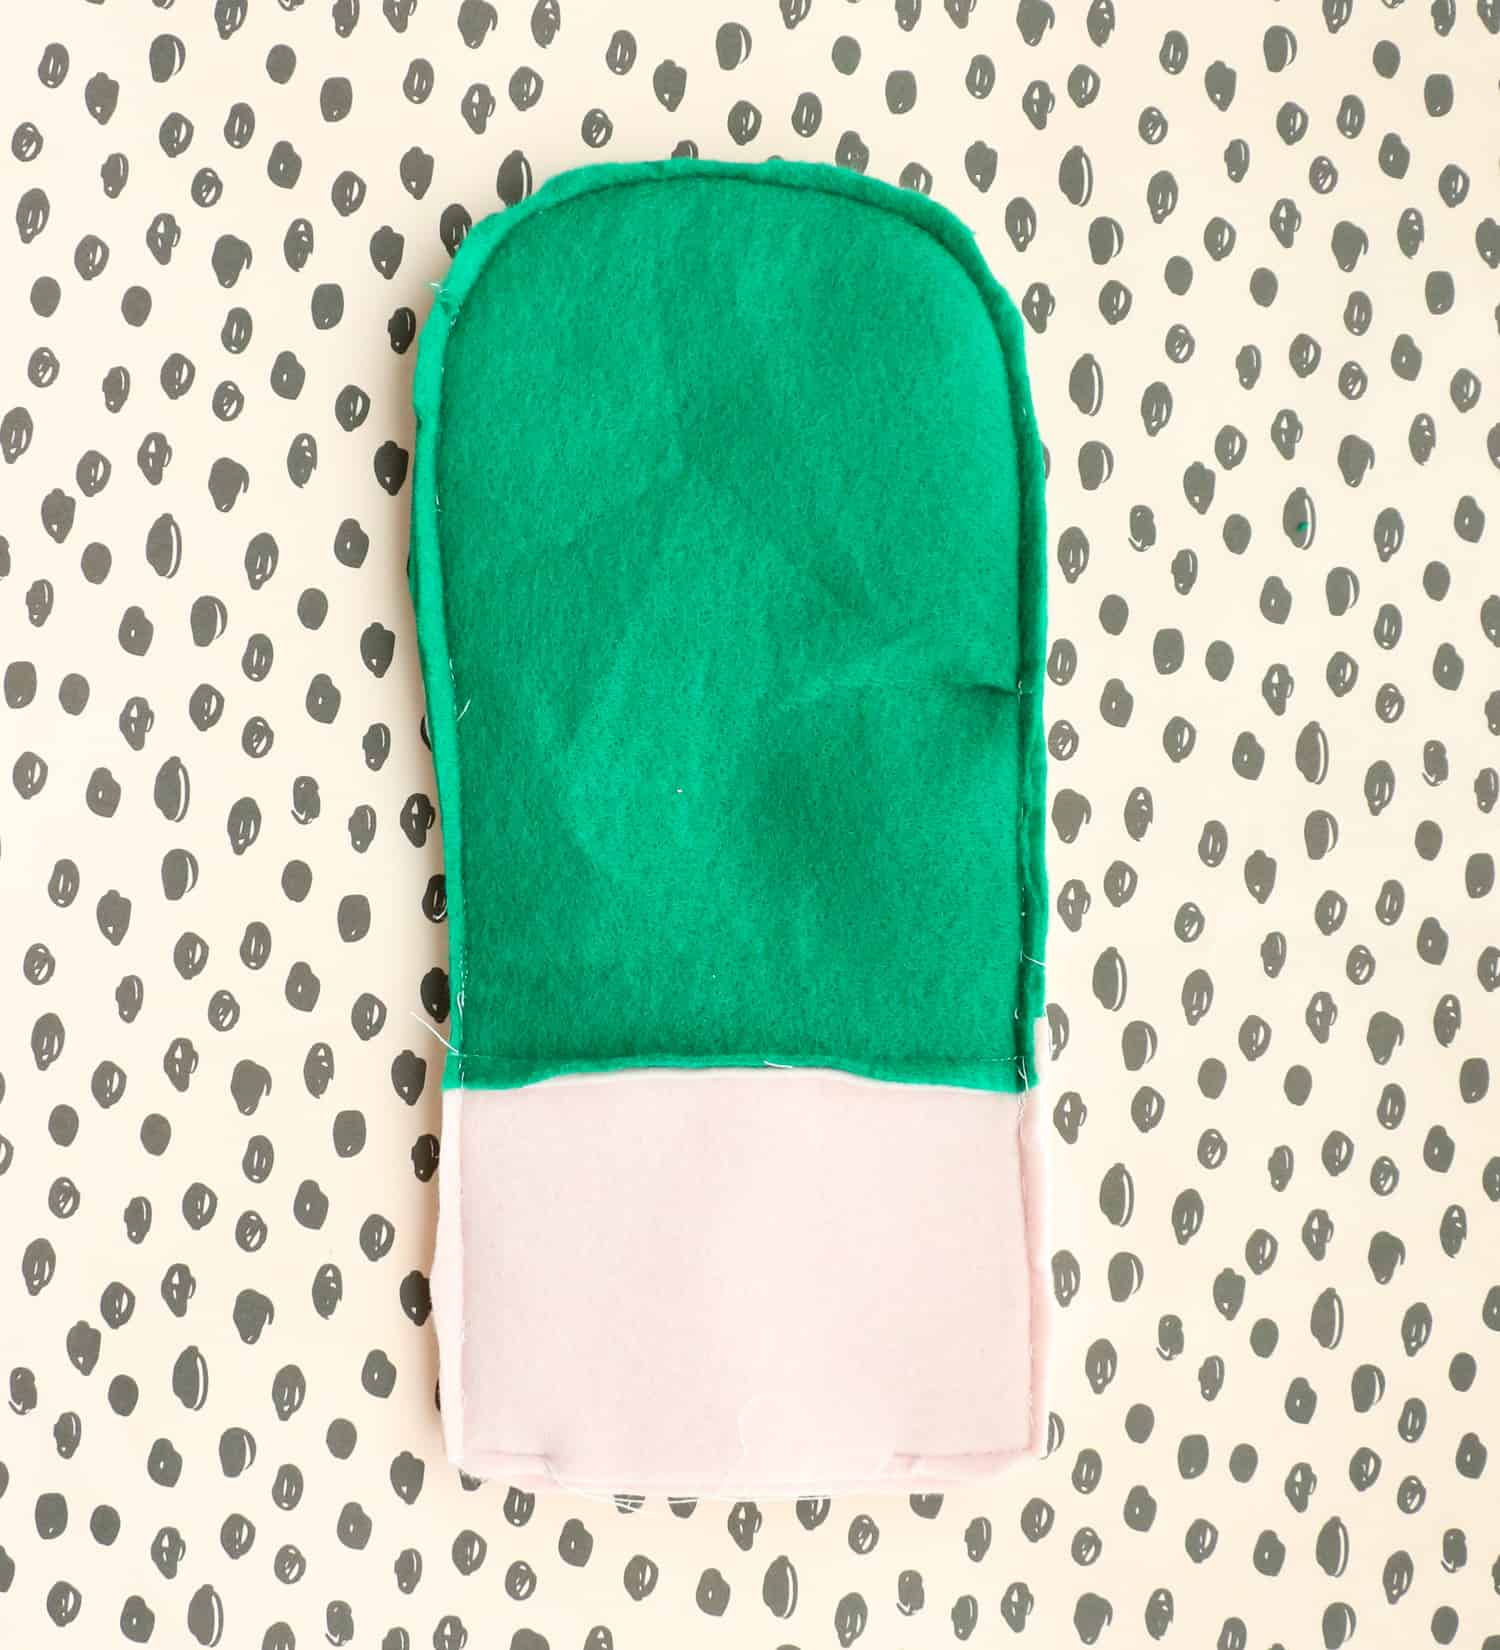 DIY-Cactus-Oven-Mitts-Click-Through-for-Tutorial-1-14